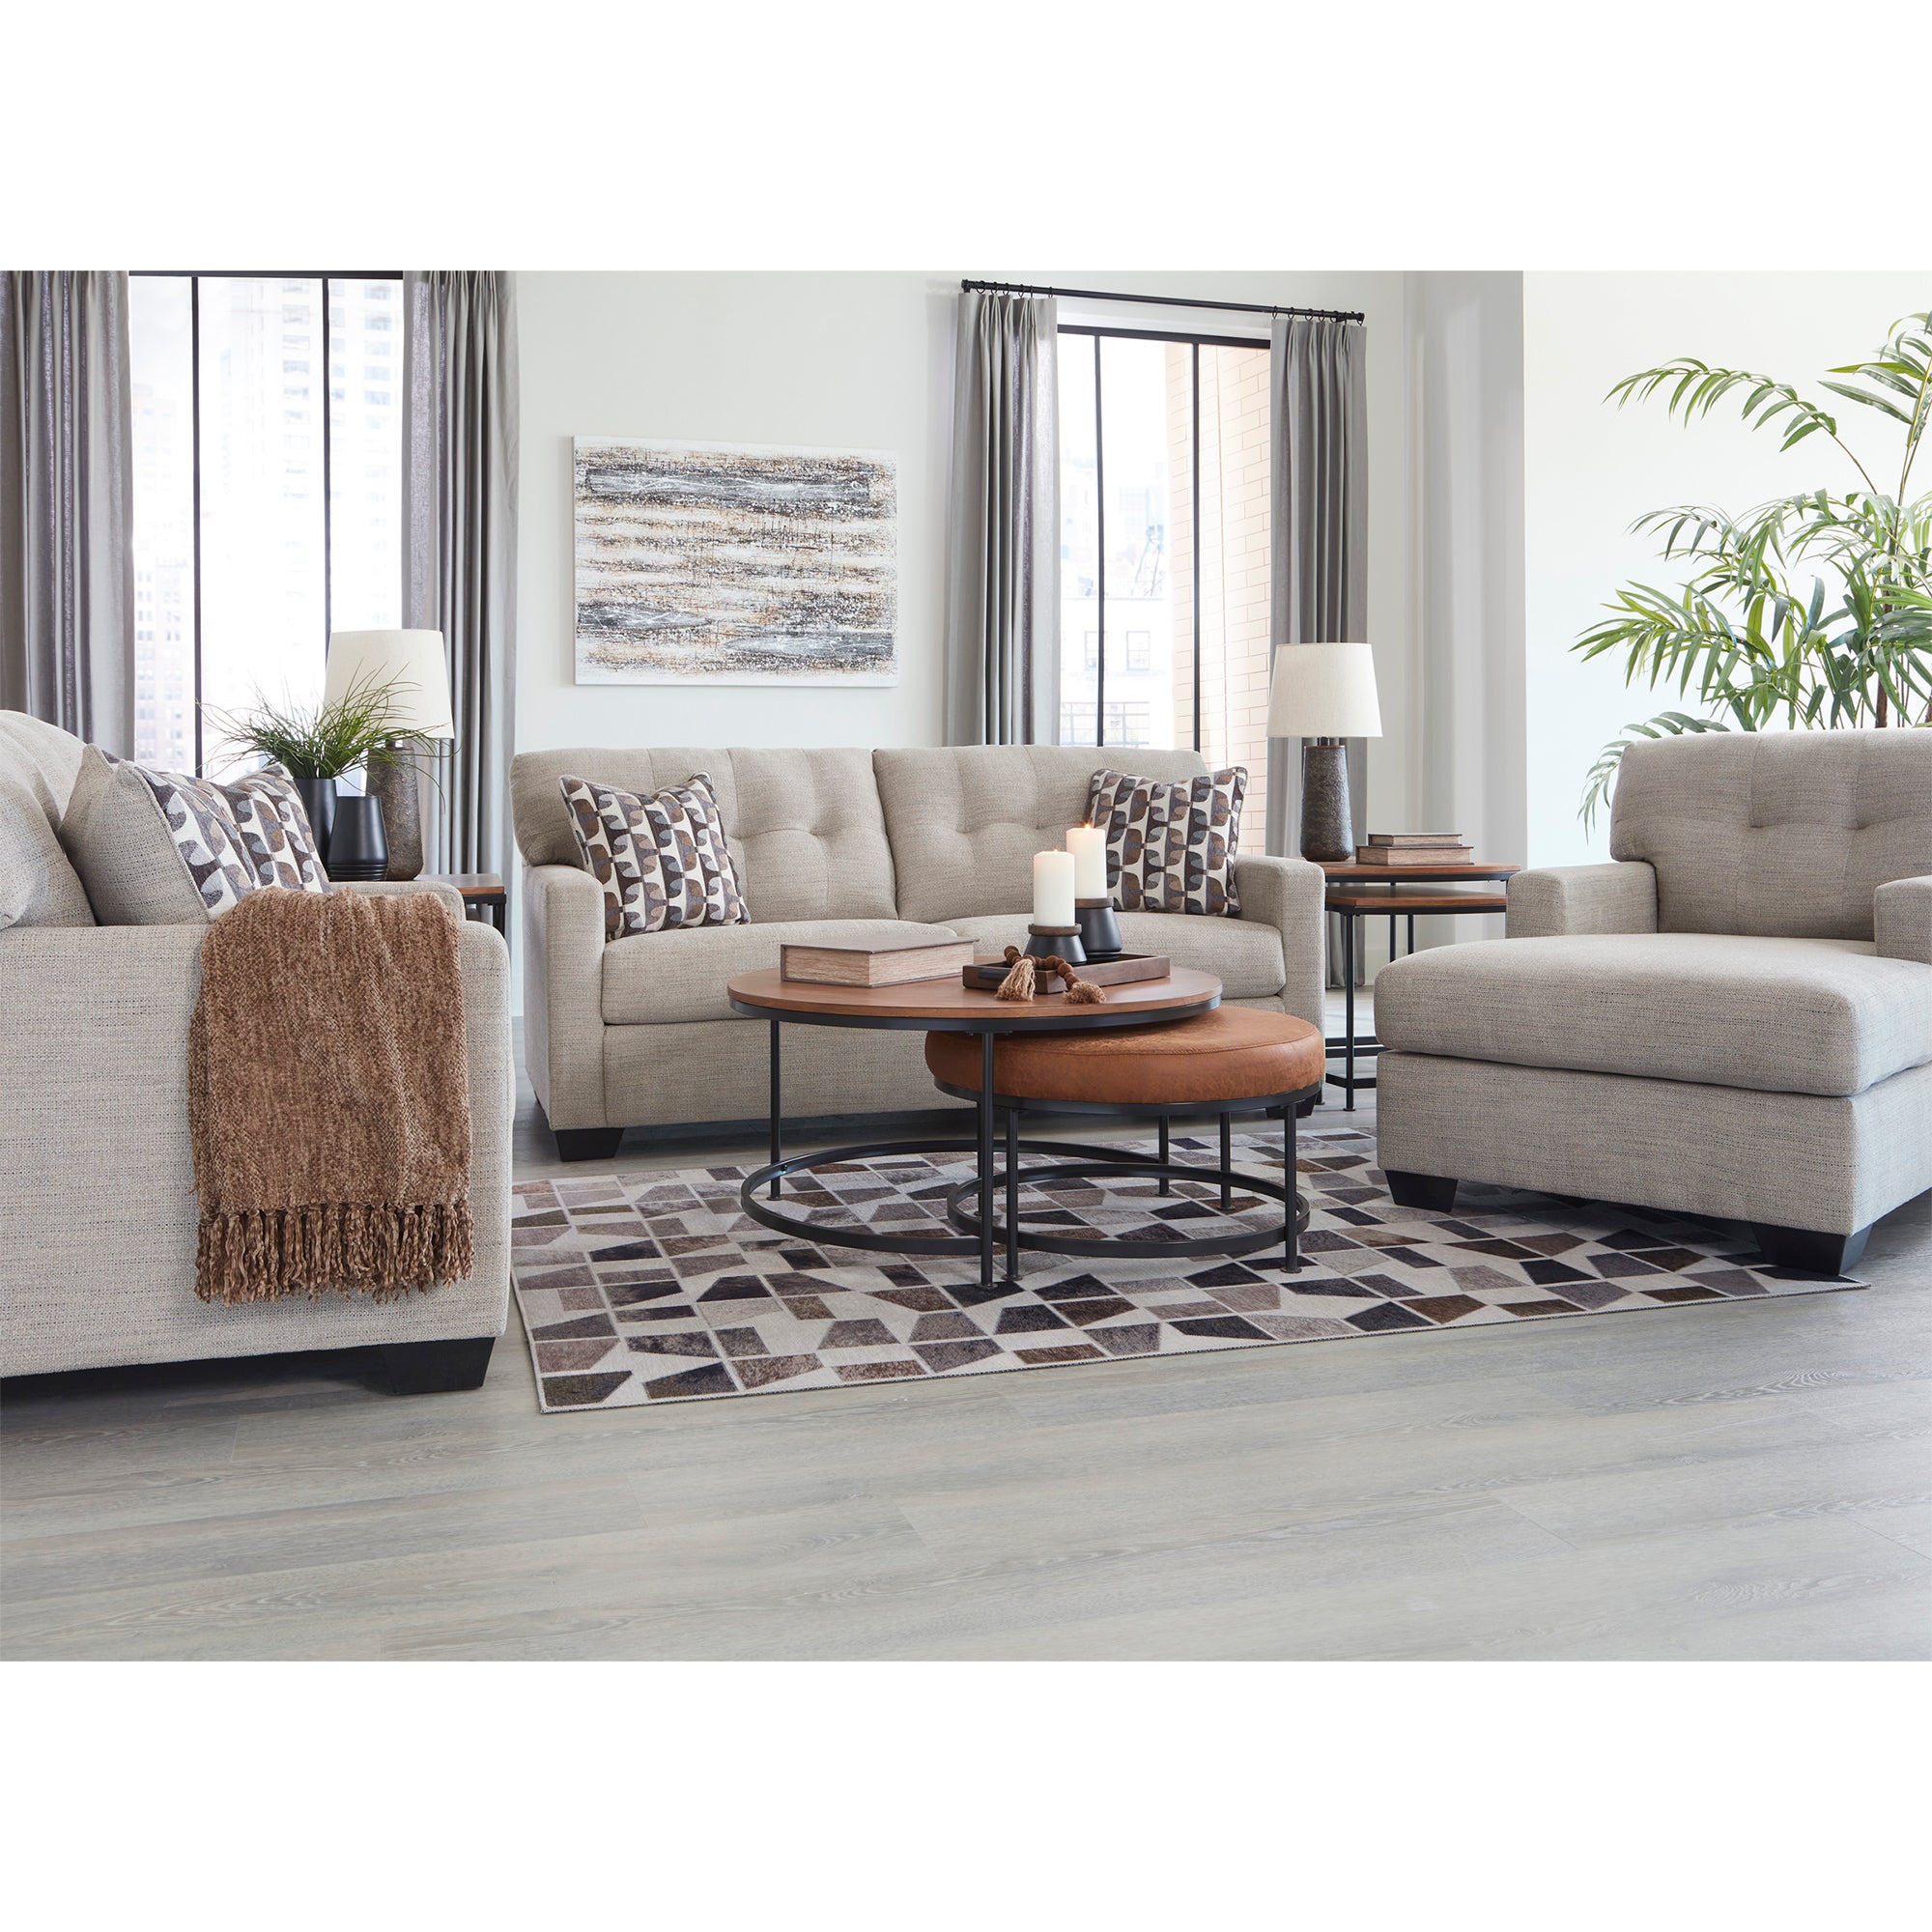 Pebble Mahoney Sofa and Loveseat with plush upholstery, great for family rooms in Milwaukee